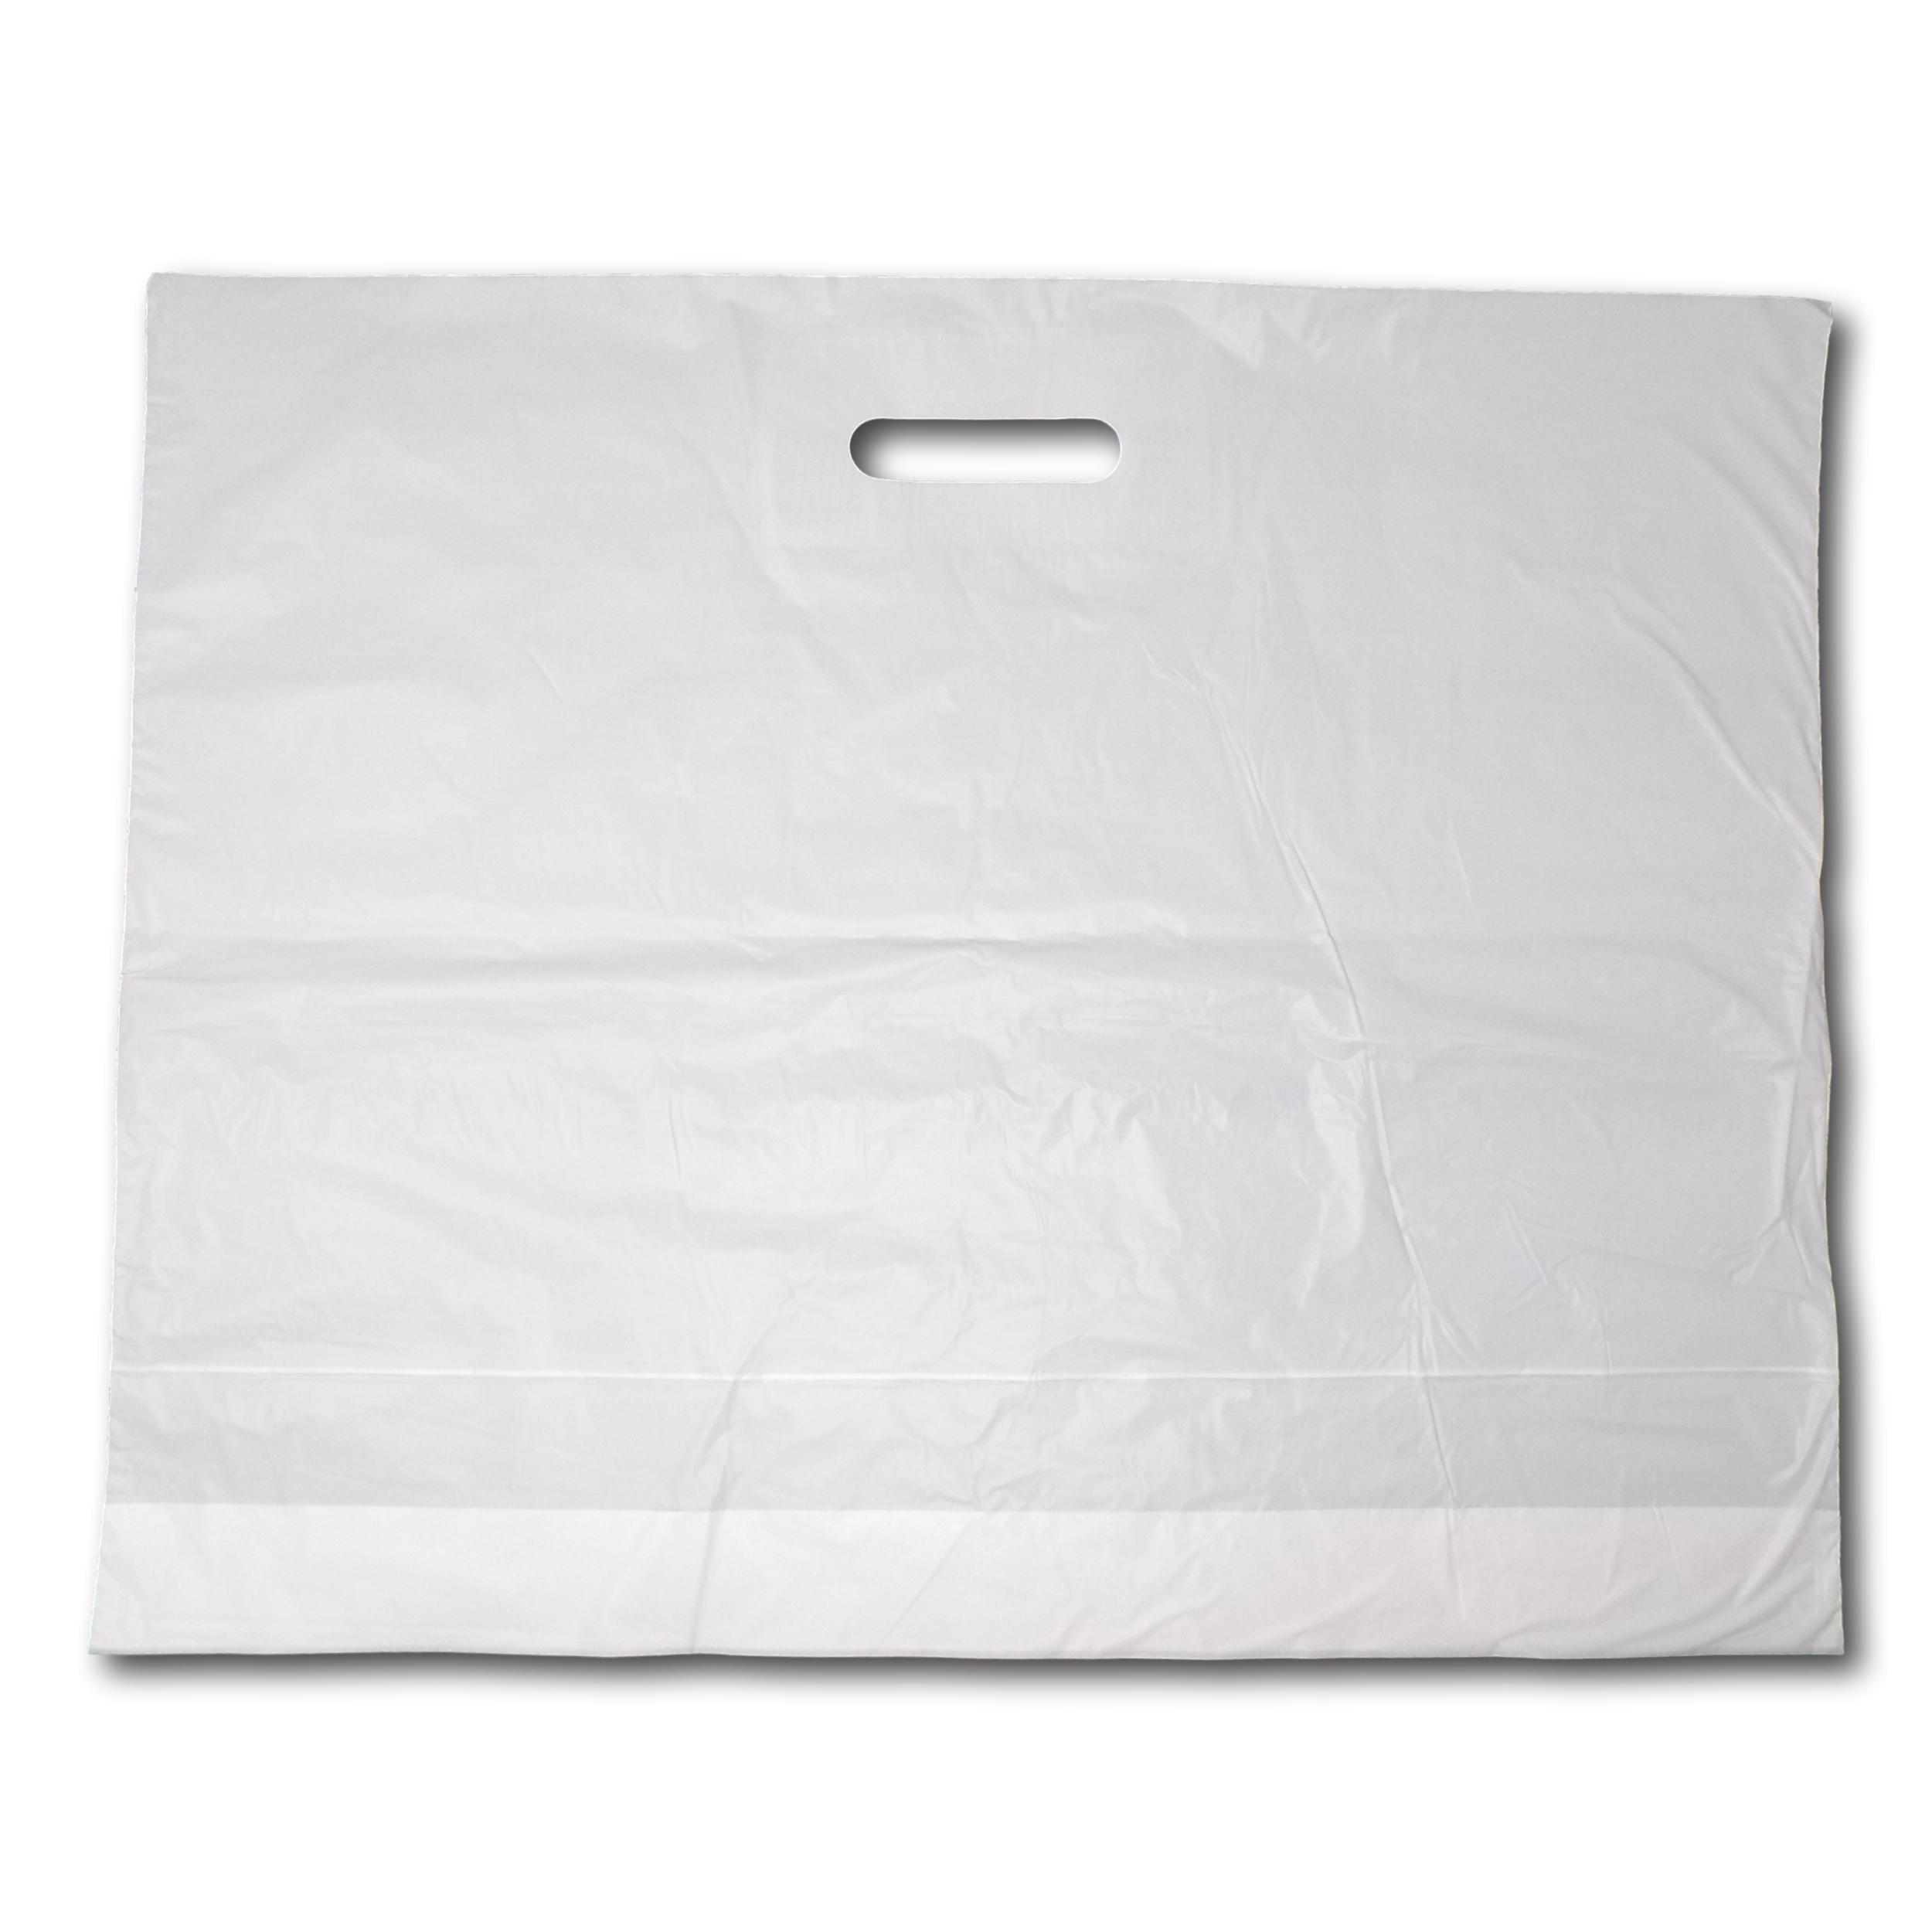 Patch Handle Carrier Bags - XL - 22'' x 18'' x 3'' - White (Pack of 100)